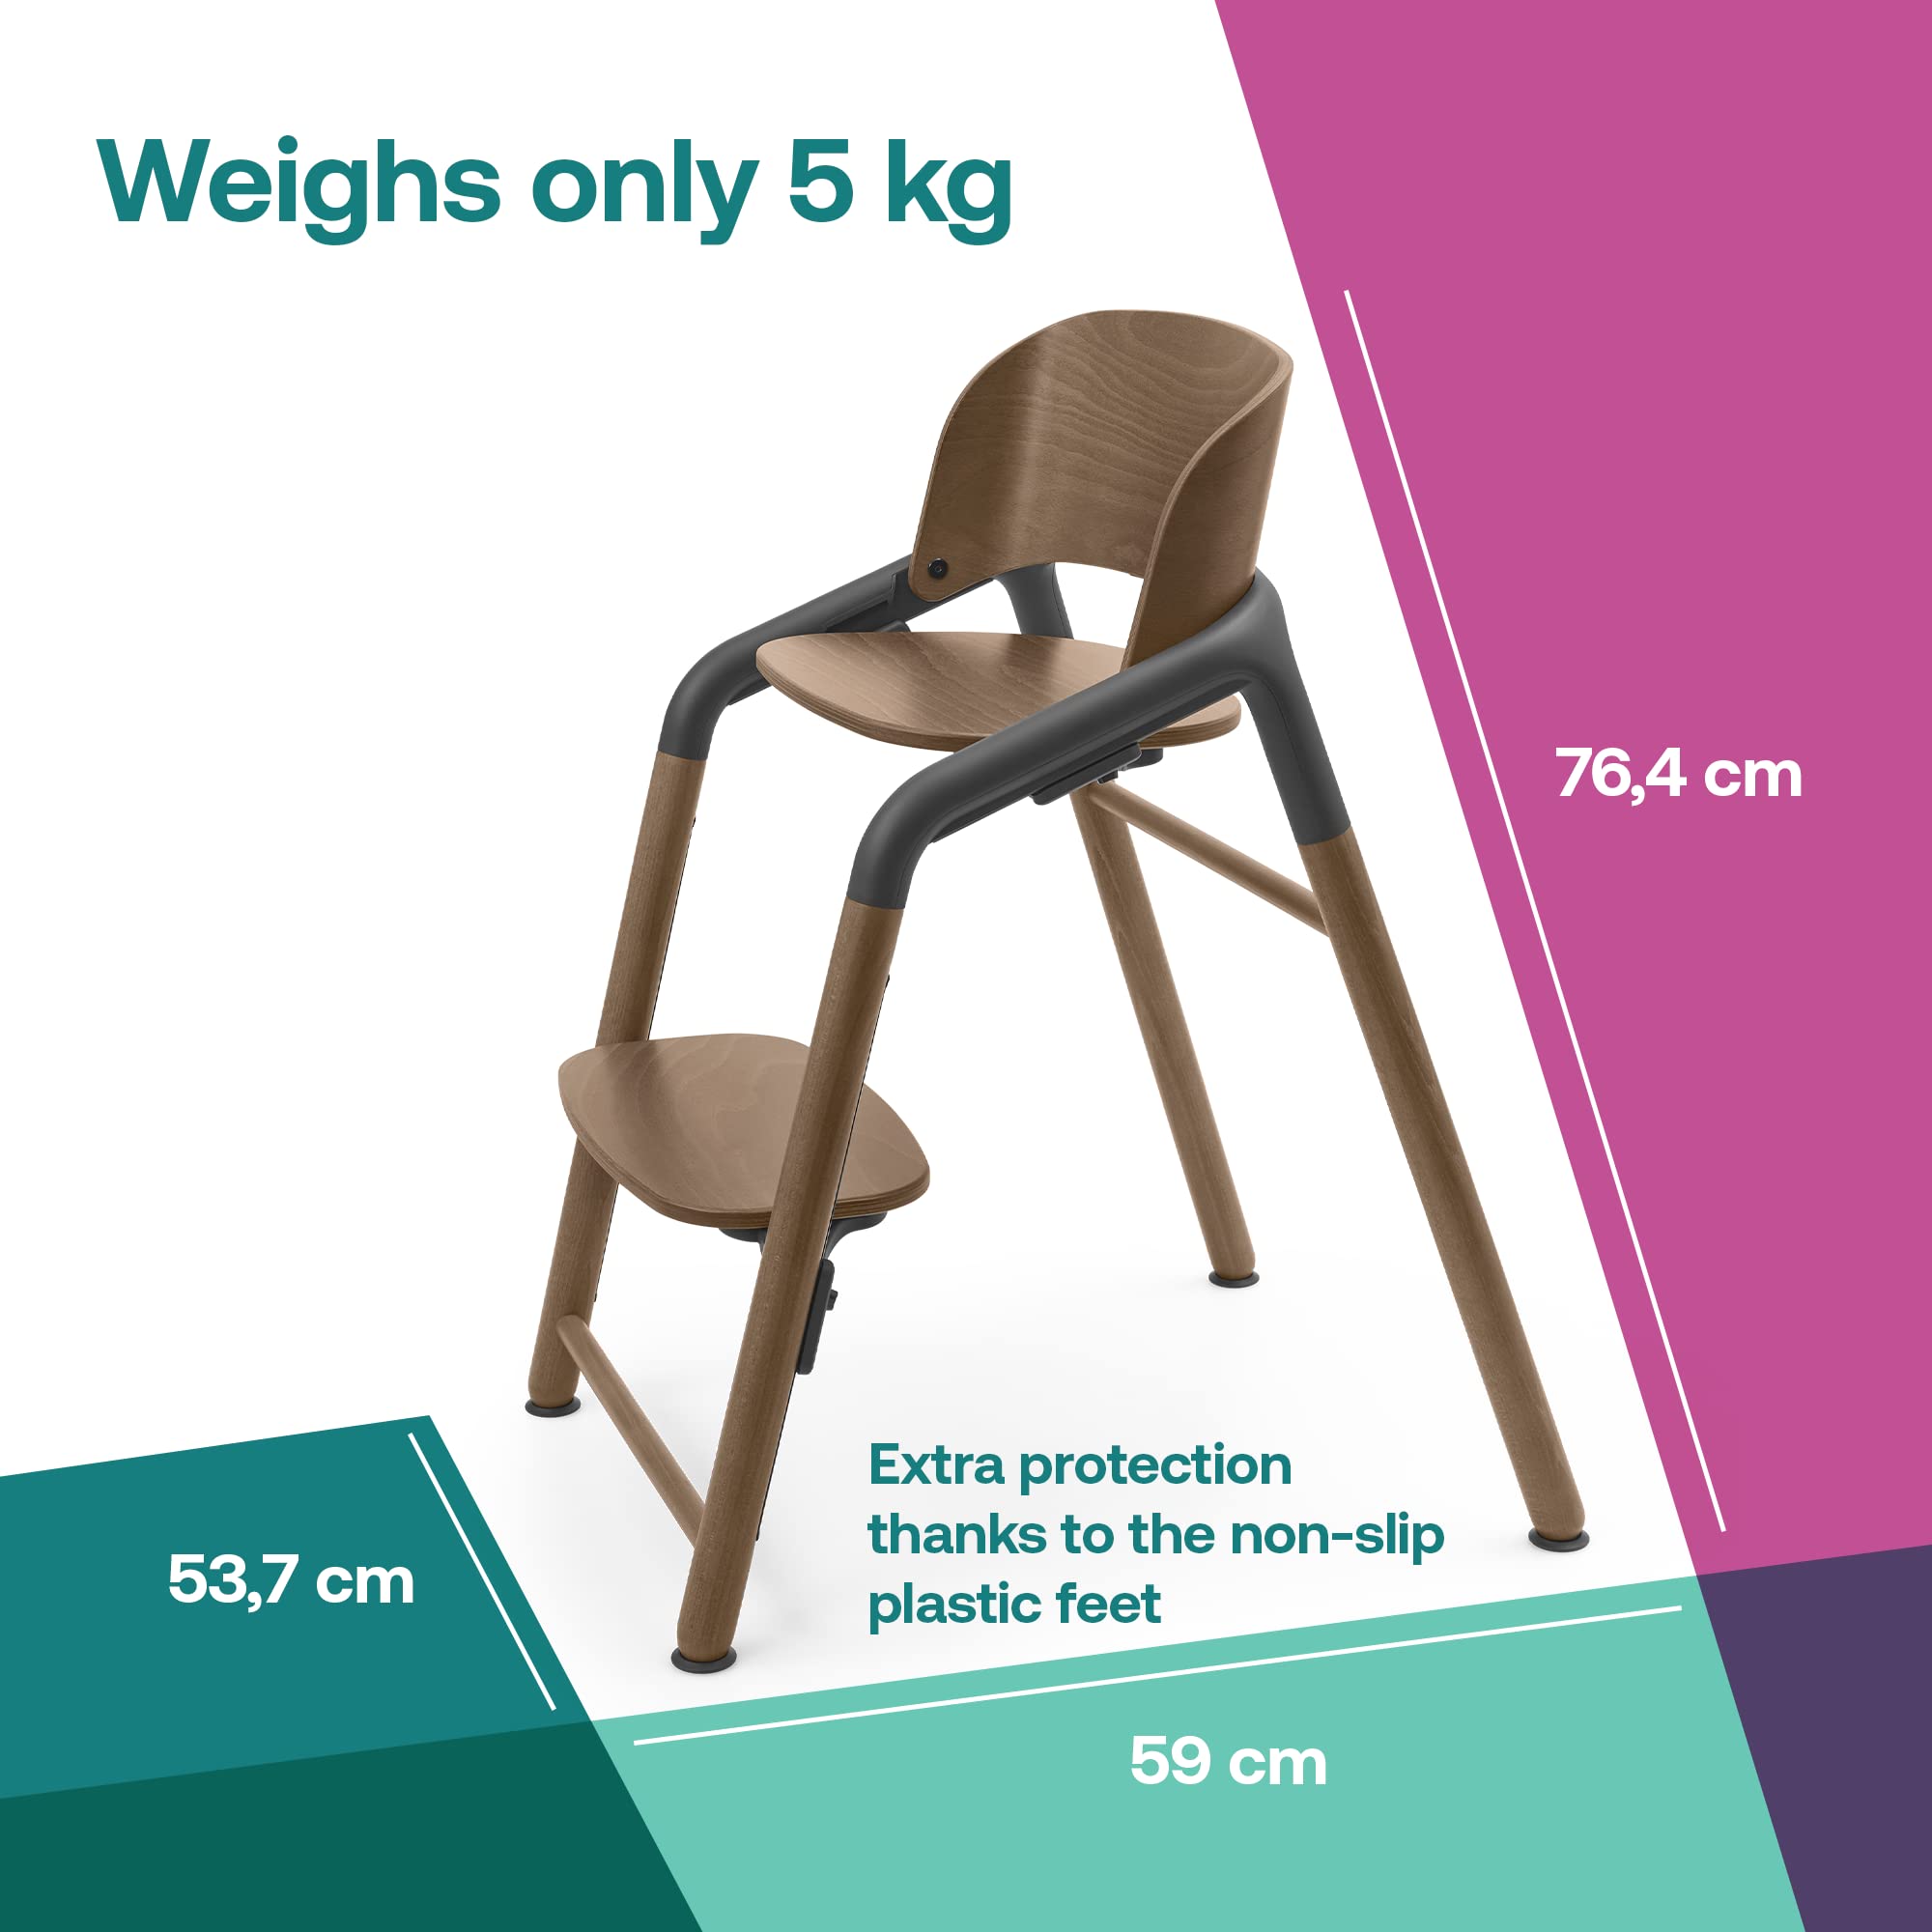 Bugaboo Giraffe Wooden Baby High Chair, Adjustable in 1 Second, Easy to Clean, Safe and Ergonomic Highchair, Suitable from Birth in Combination with Newborn Set (Sold Separately), Warm Wood/Gray